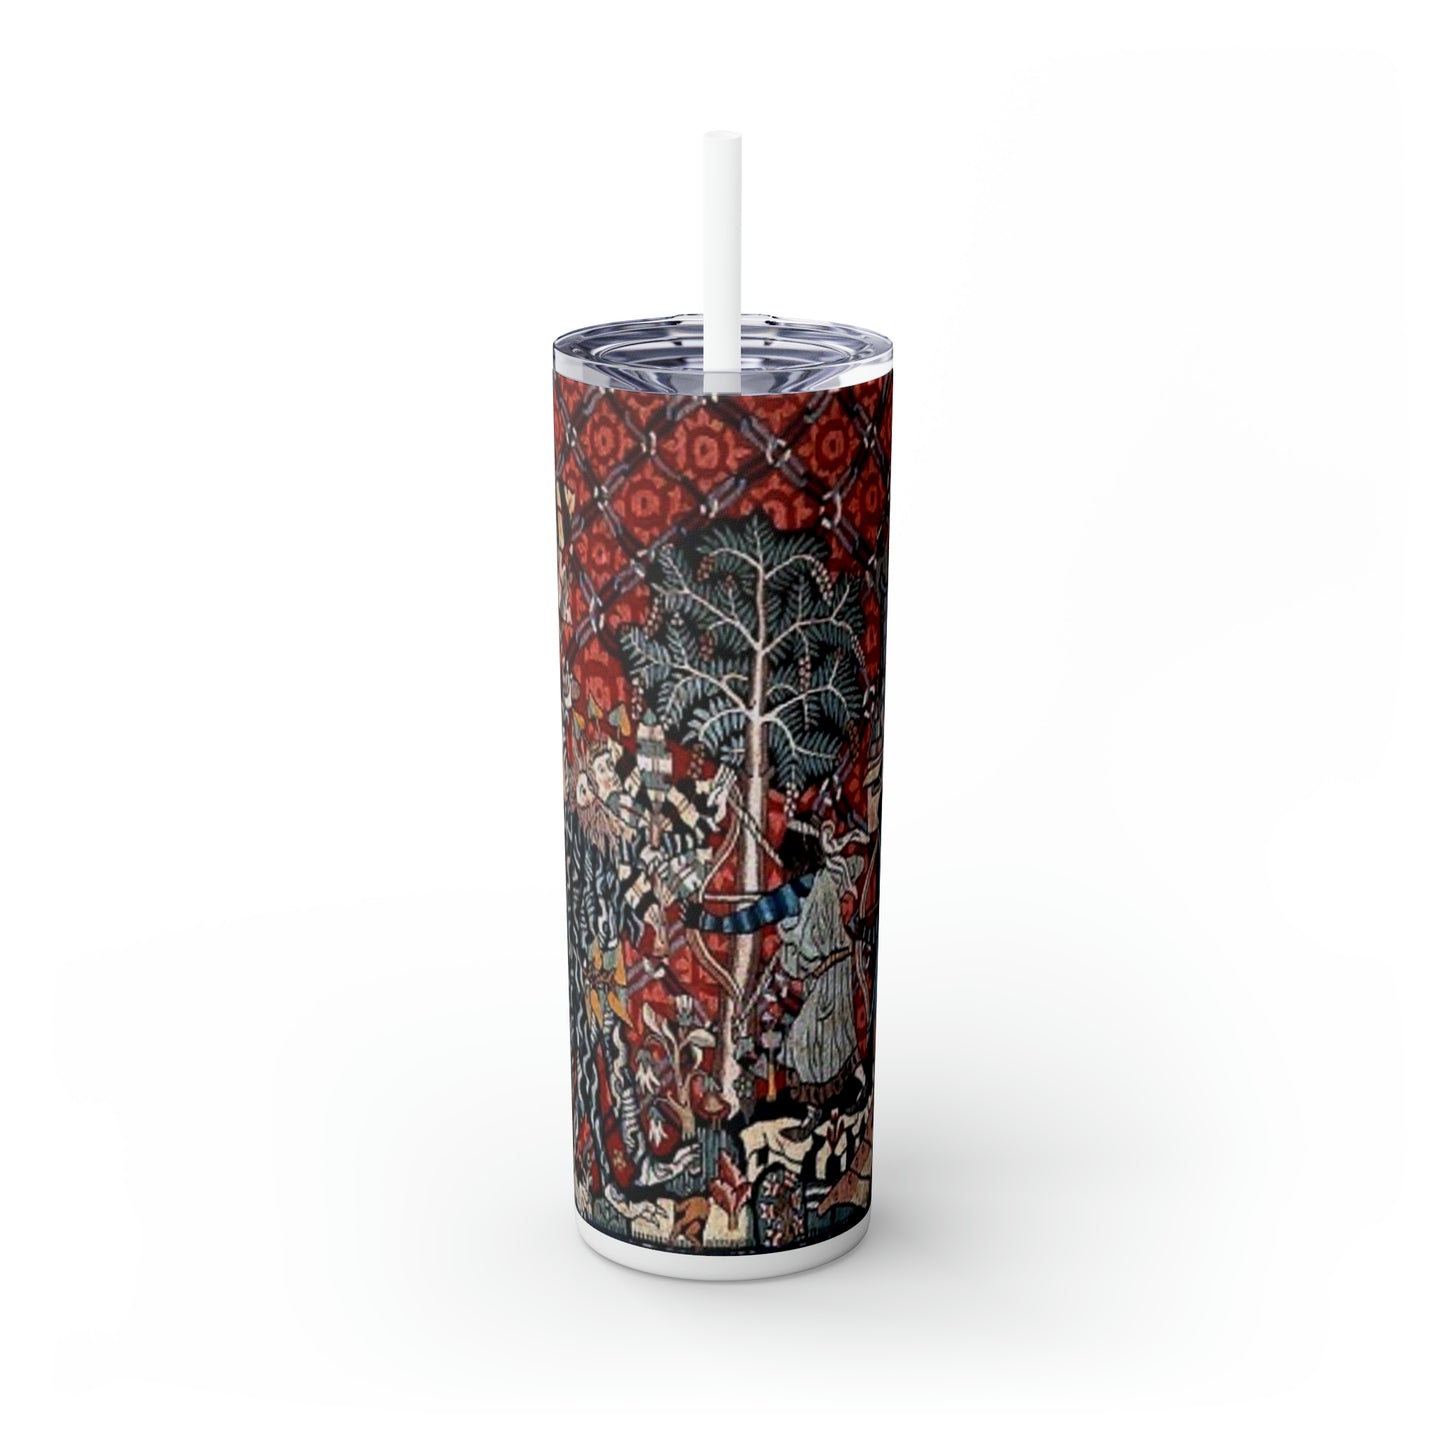 Wild Men Attack The Stronghold of The Moorish Castle-Skinny Tumbler with Straw, 20oz